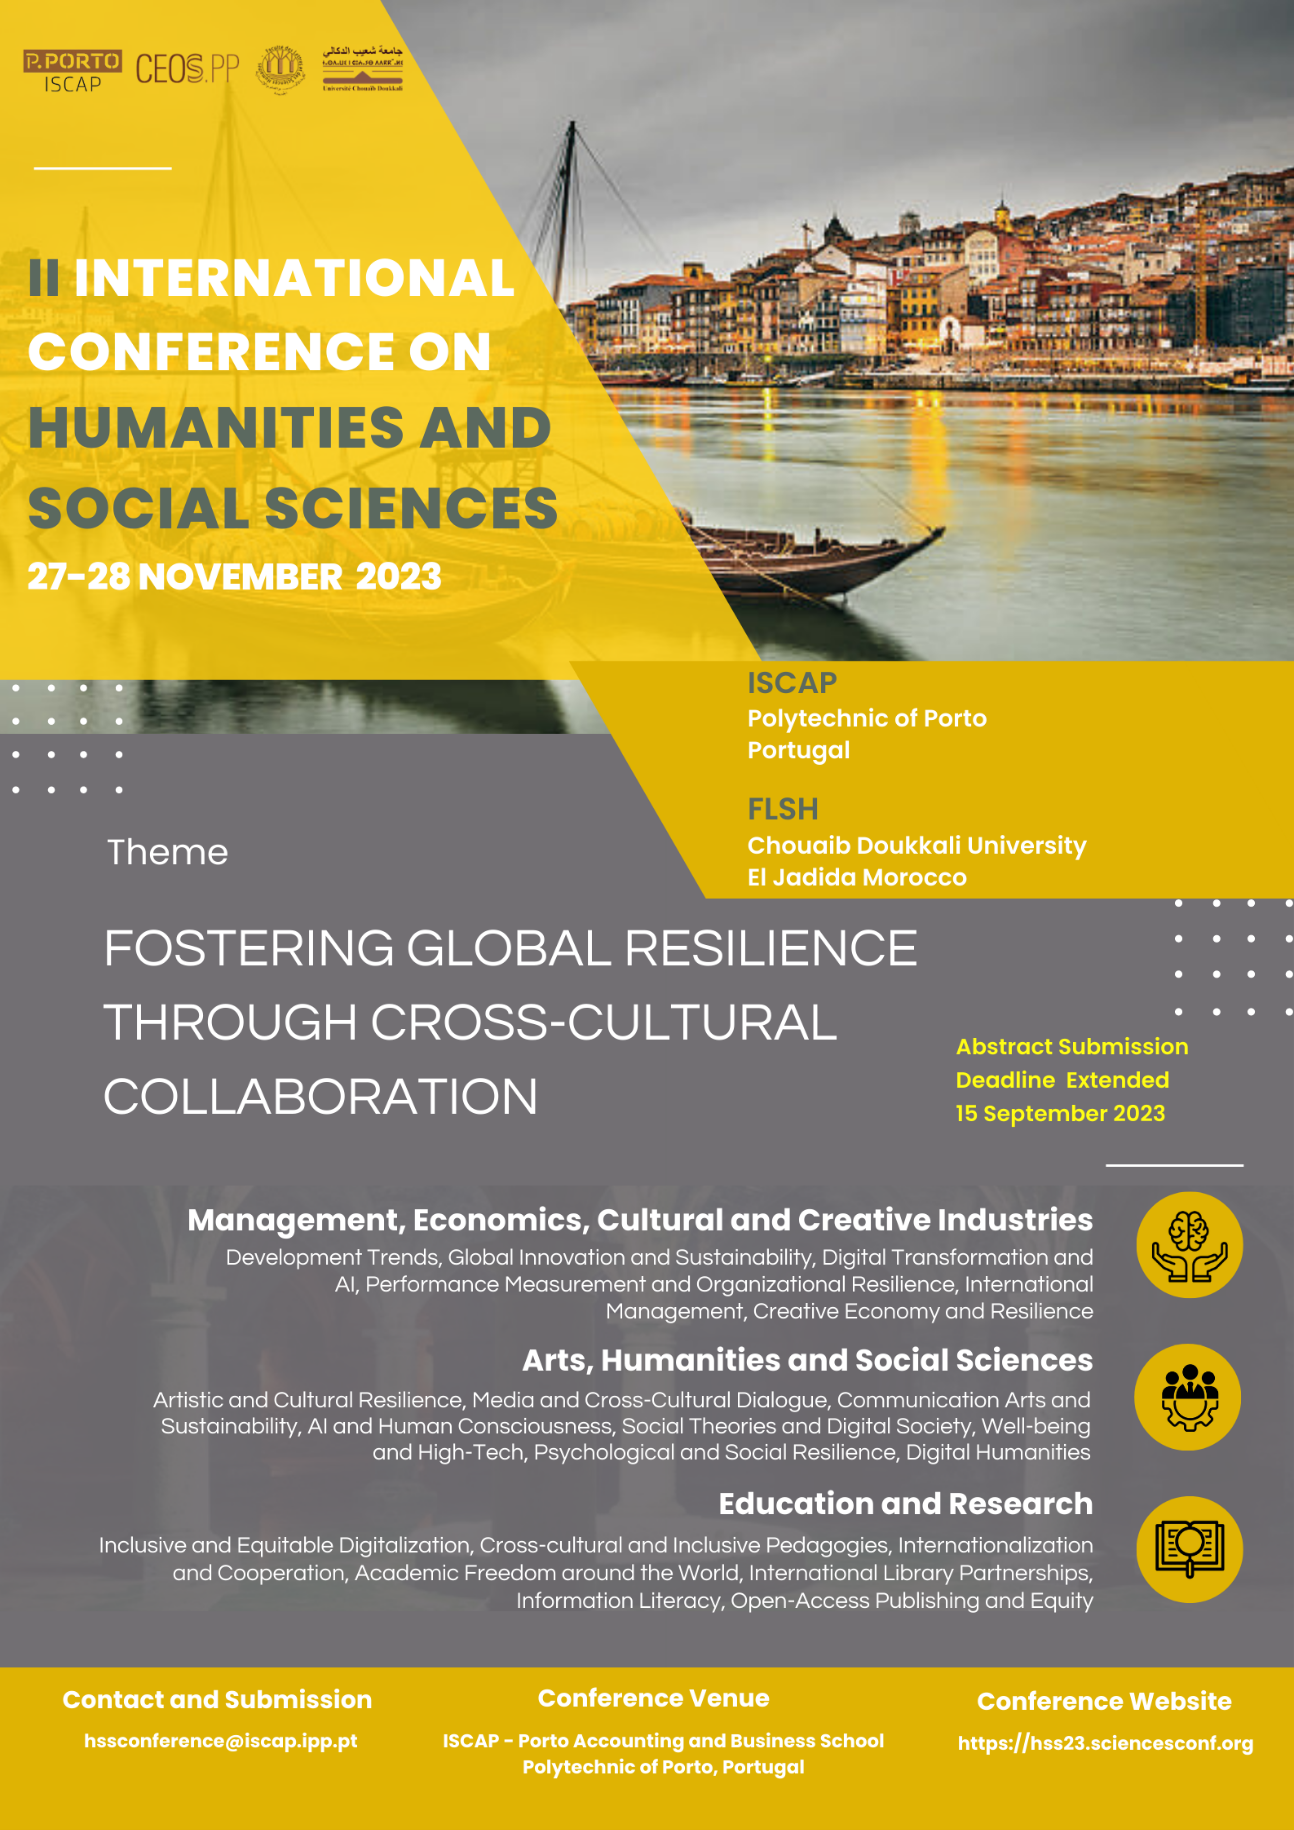 The 2nd International Conference on Humanities and Social Sciences: Fostering Global Resilience through Cross-cultural Collaboration (Porto)